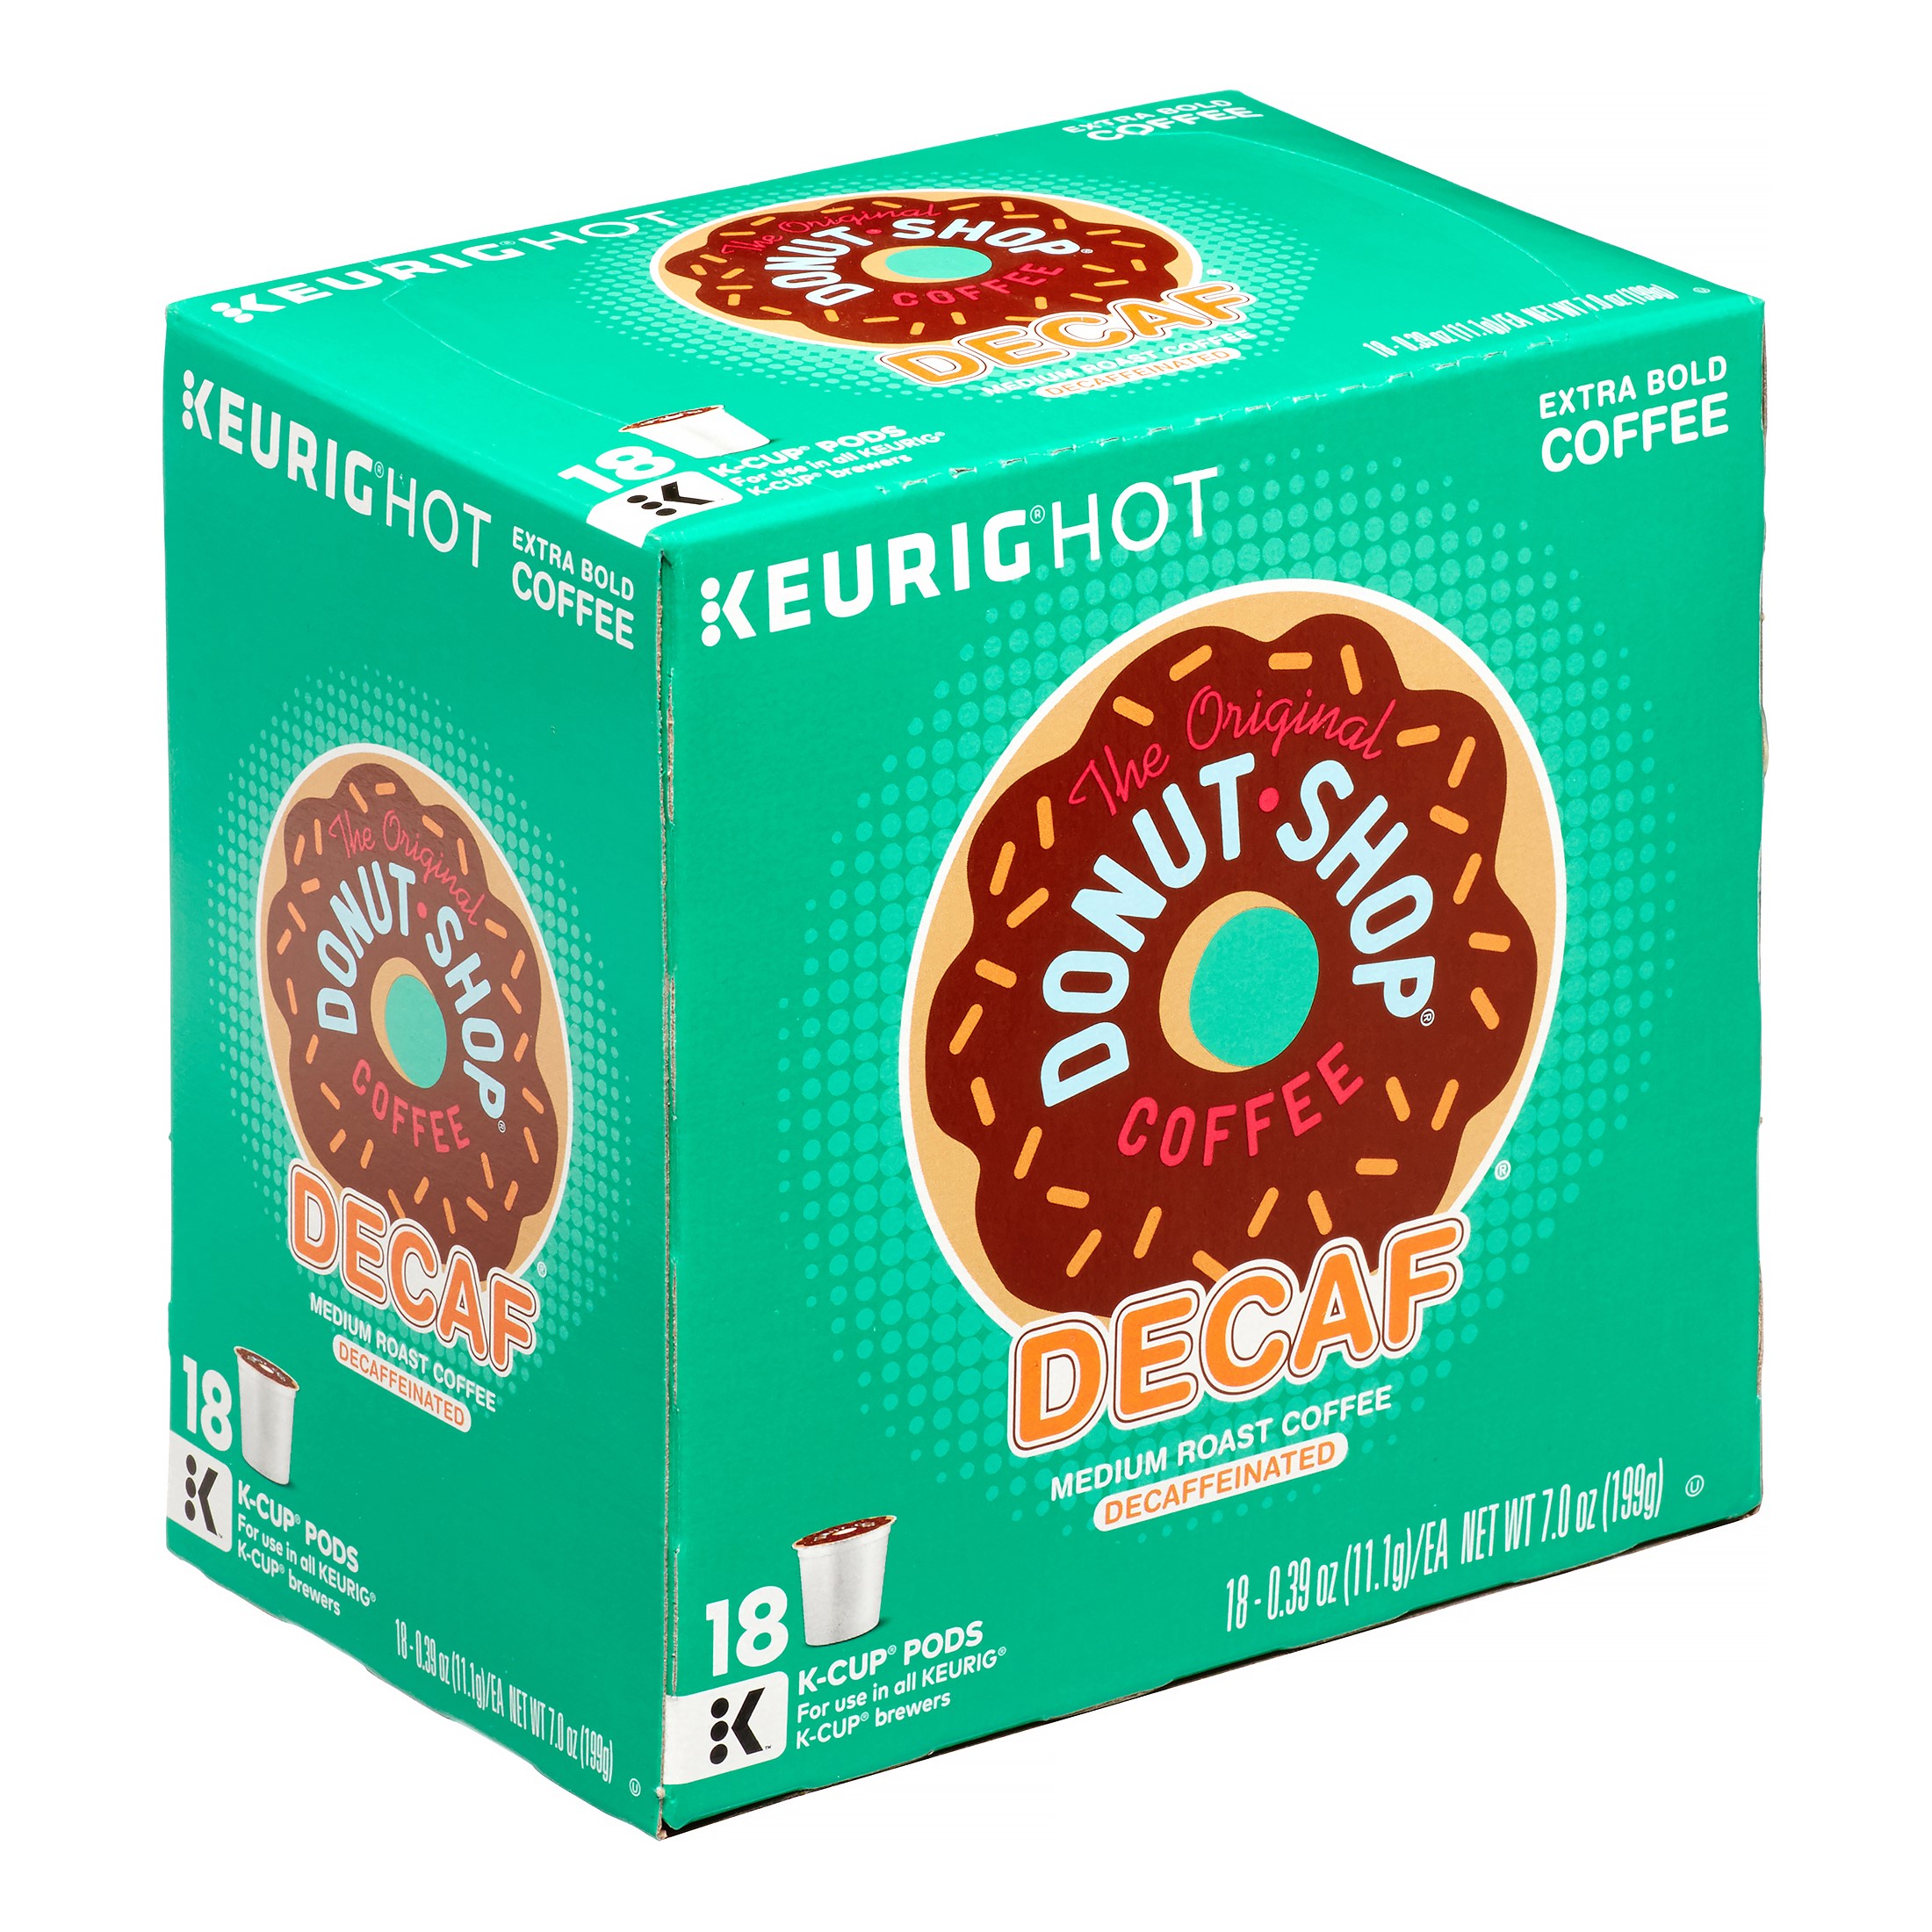 The Original Donut Shop Decaf K-Cup Coffee Pods, Medium Roast, 18 Count for Keurig Brewers - image 4 of 11